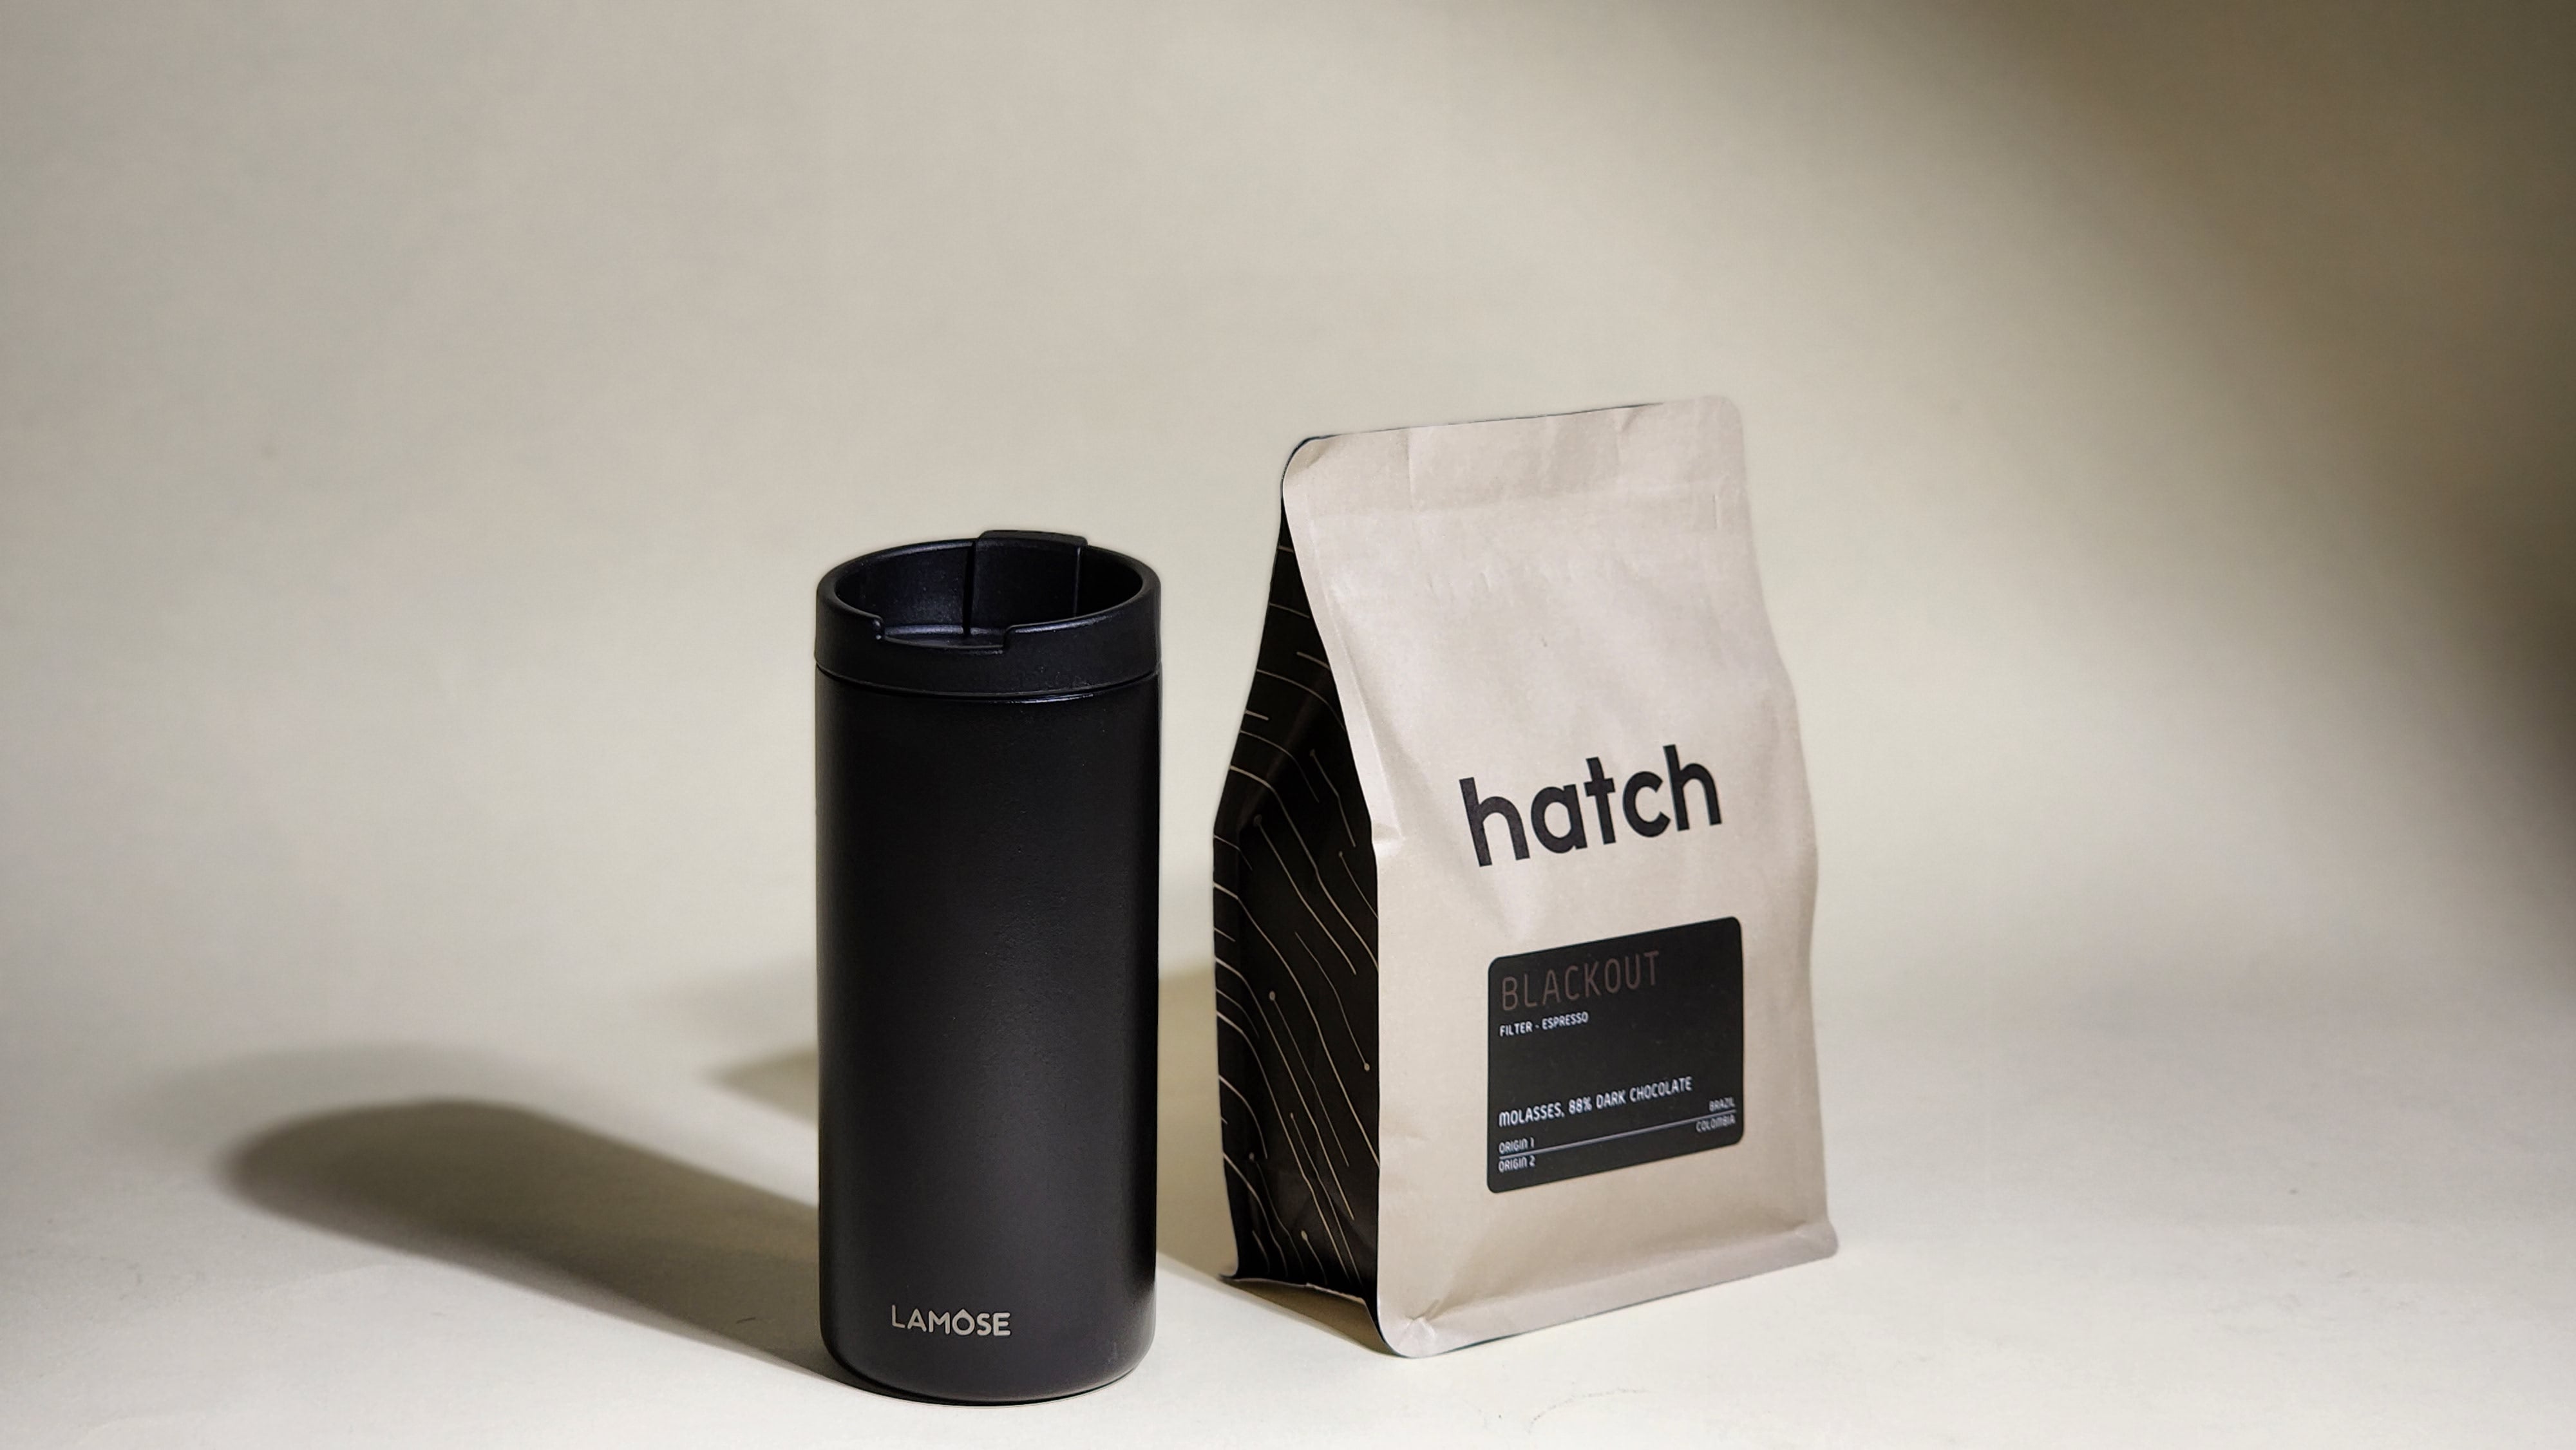 Hatch Coffee - Blackout: A bold blend for comforting days, offering classic flavors with a hint of something new. Crafted from Brazilian and Colombian beans, featuring tasting notes of molasses and 88% dark chocolate. Ideal for bold espresso and filter brewing. Explore our core coffee offerings: Supernova, Starlight, Gamma, and Blackout blends.